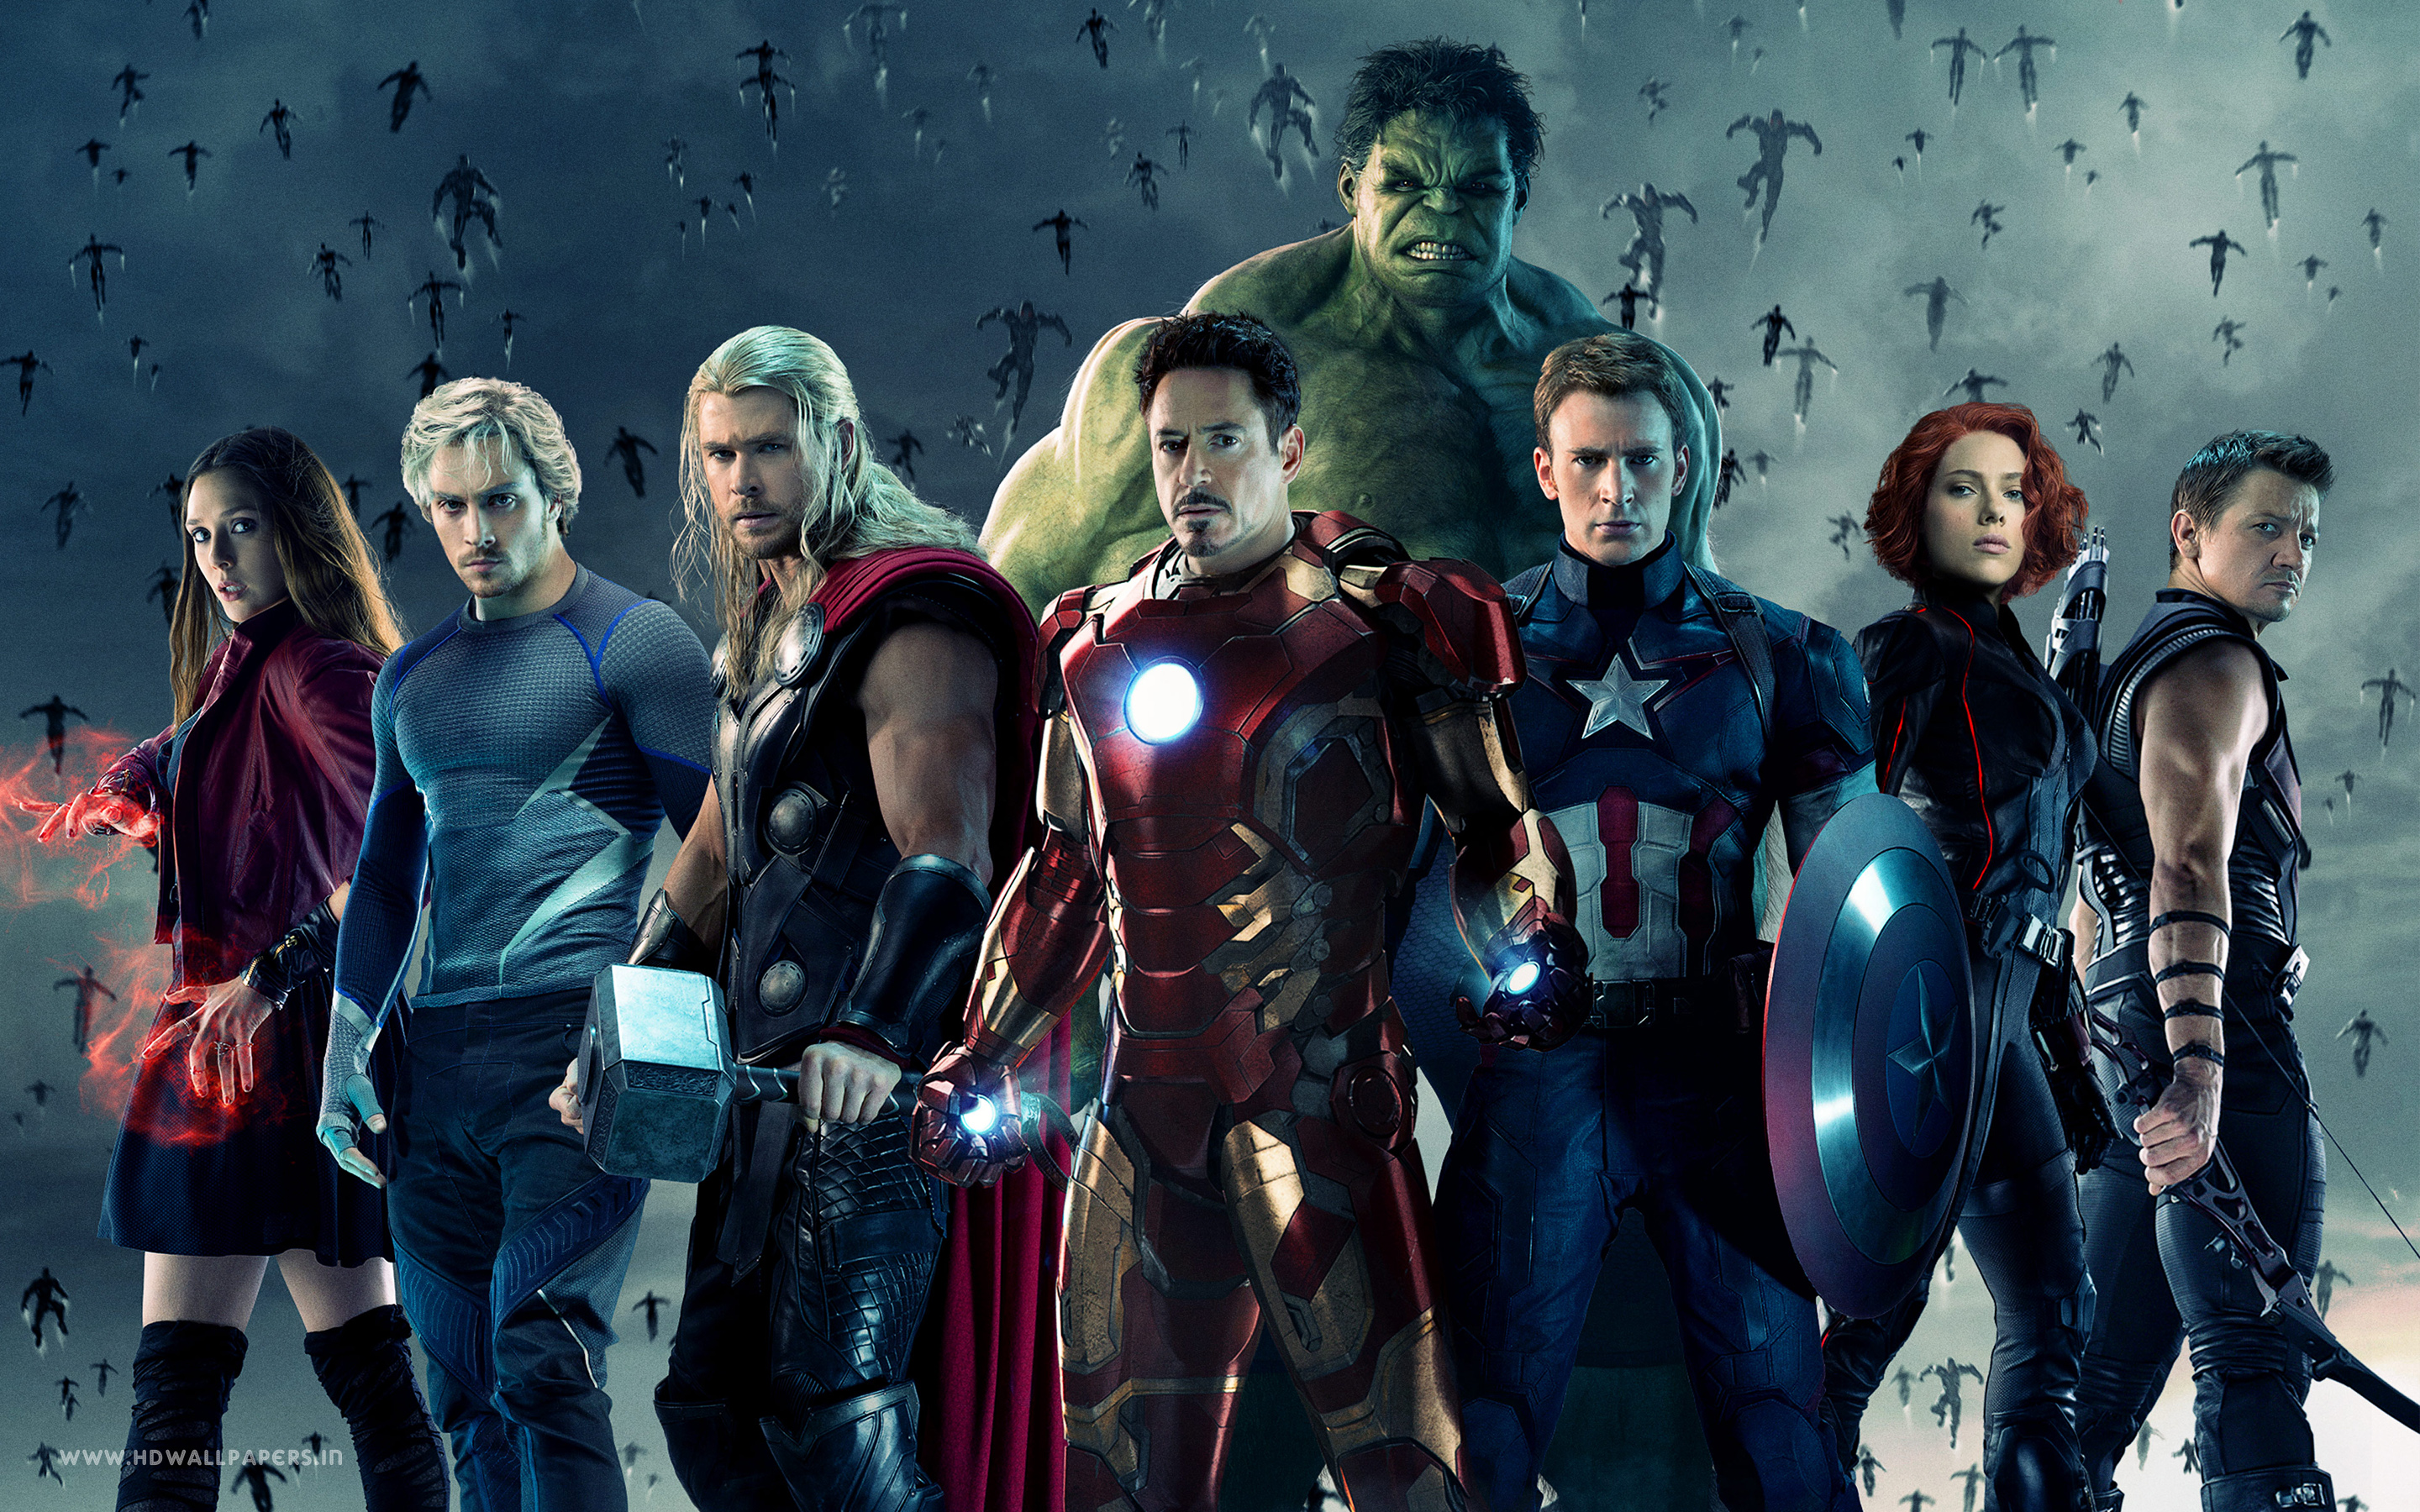 avengers age of ultron full movie in hindi download 720p bolly4u